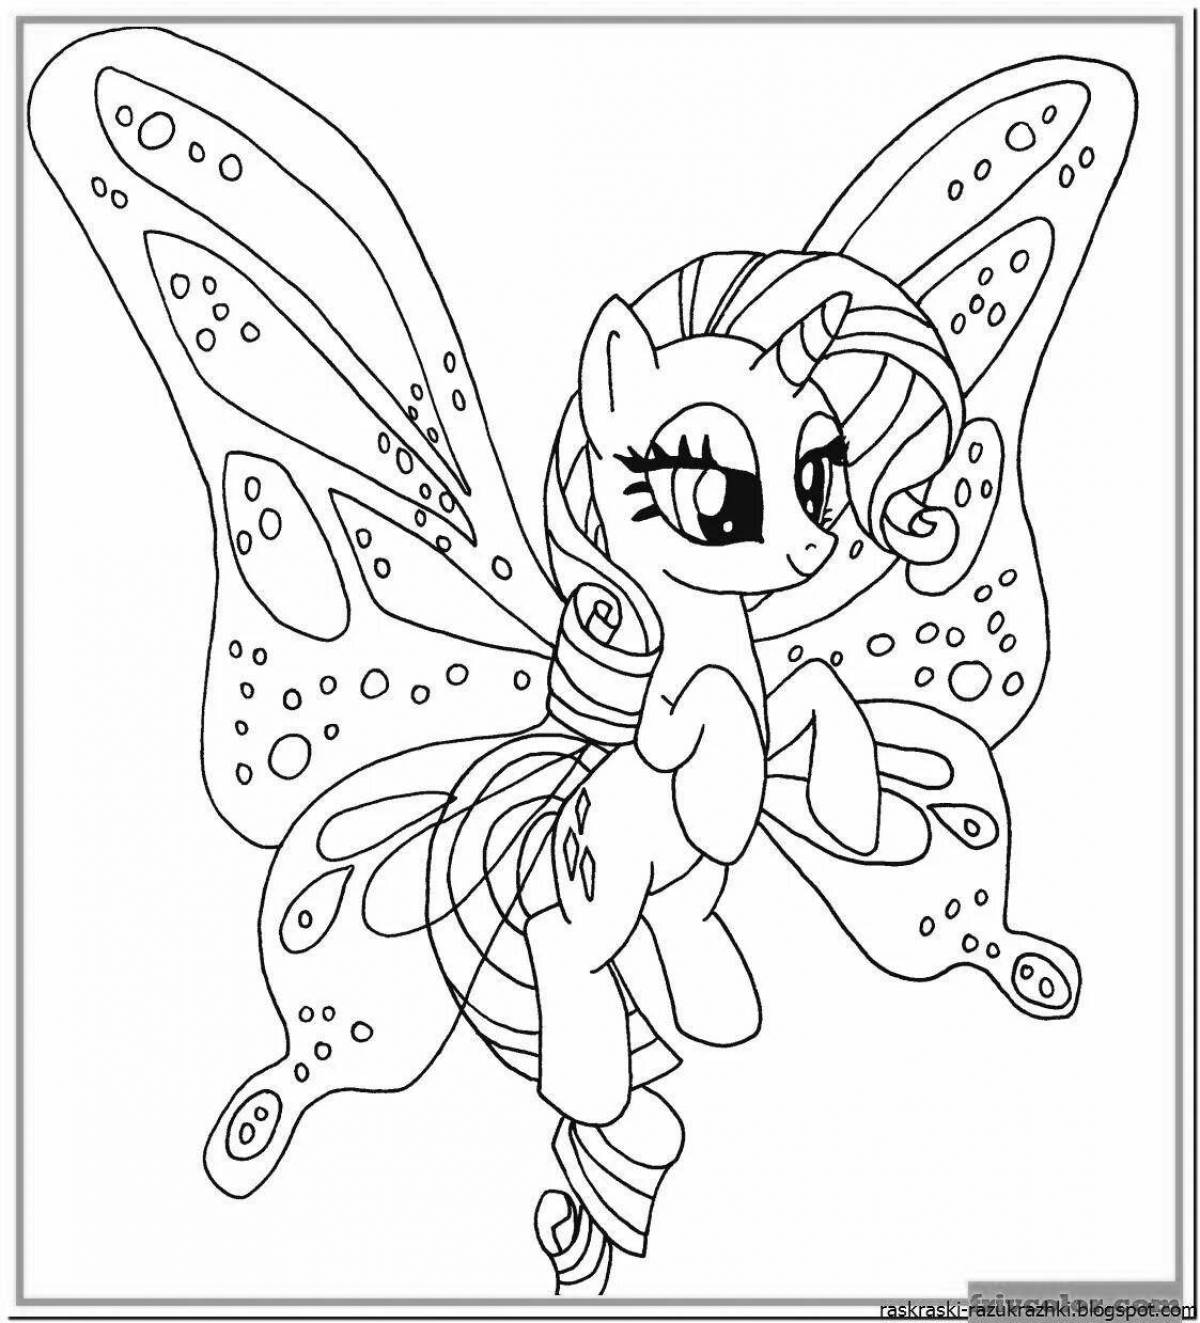 Fancy pony coloring for girls